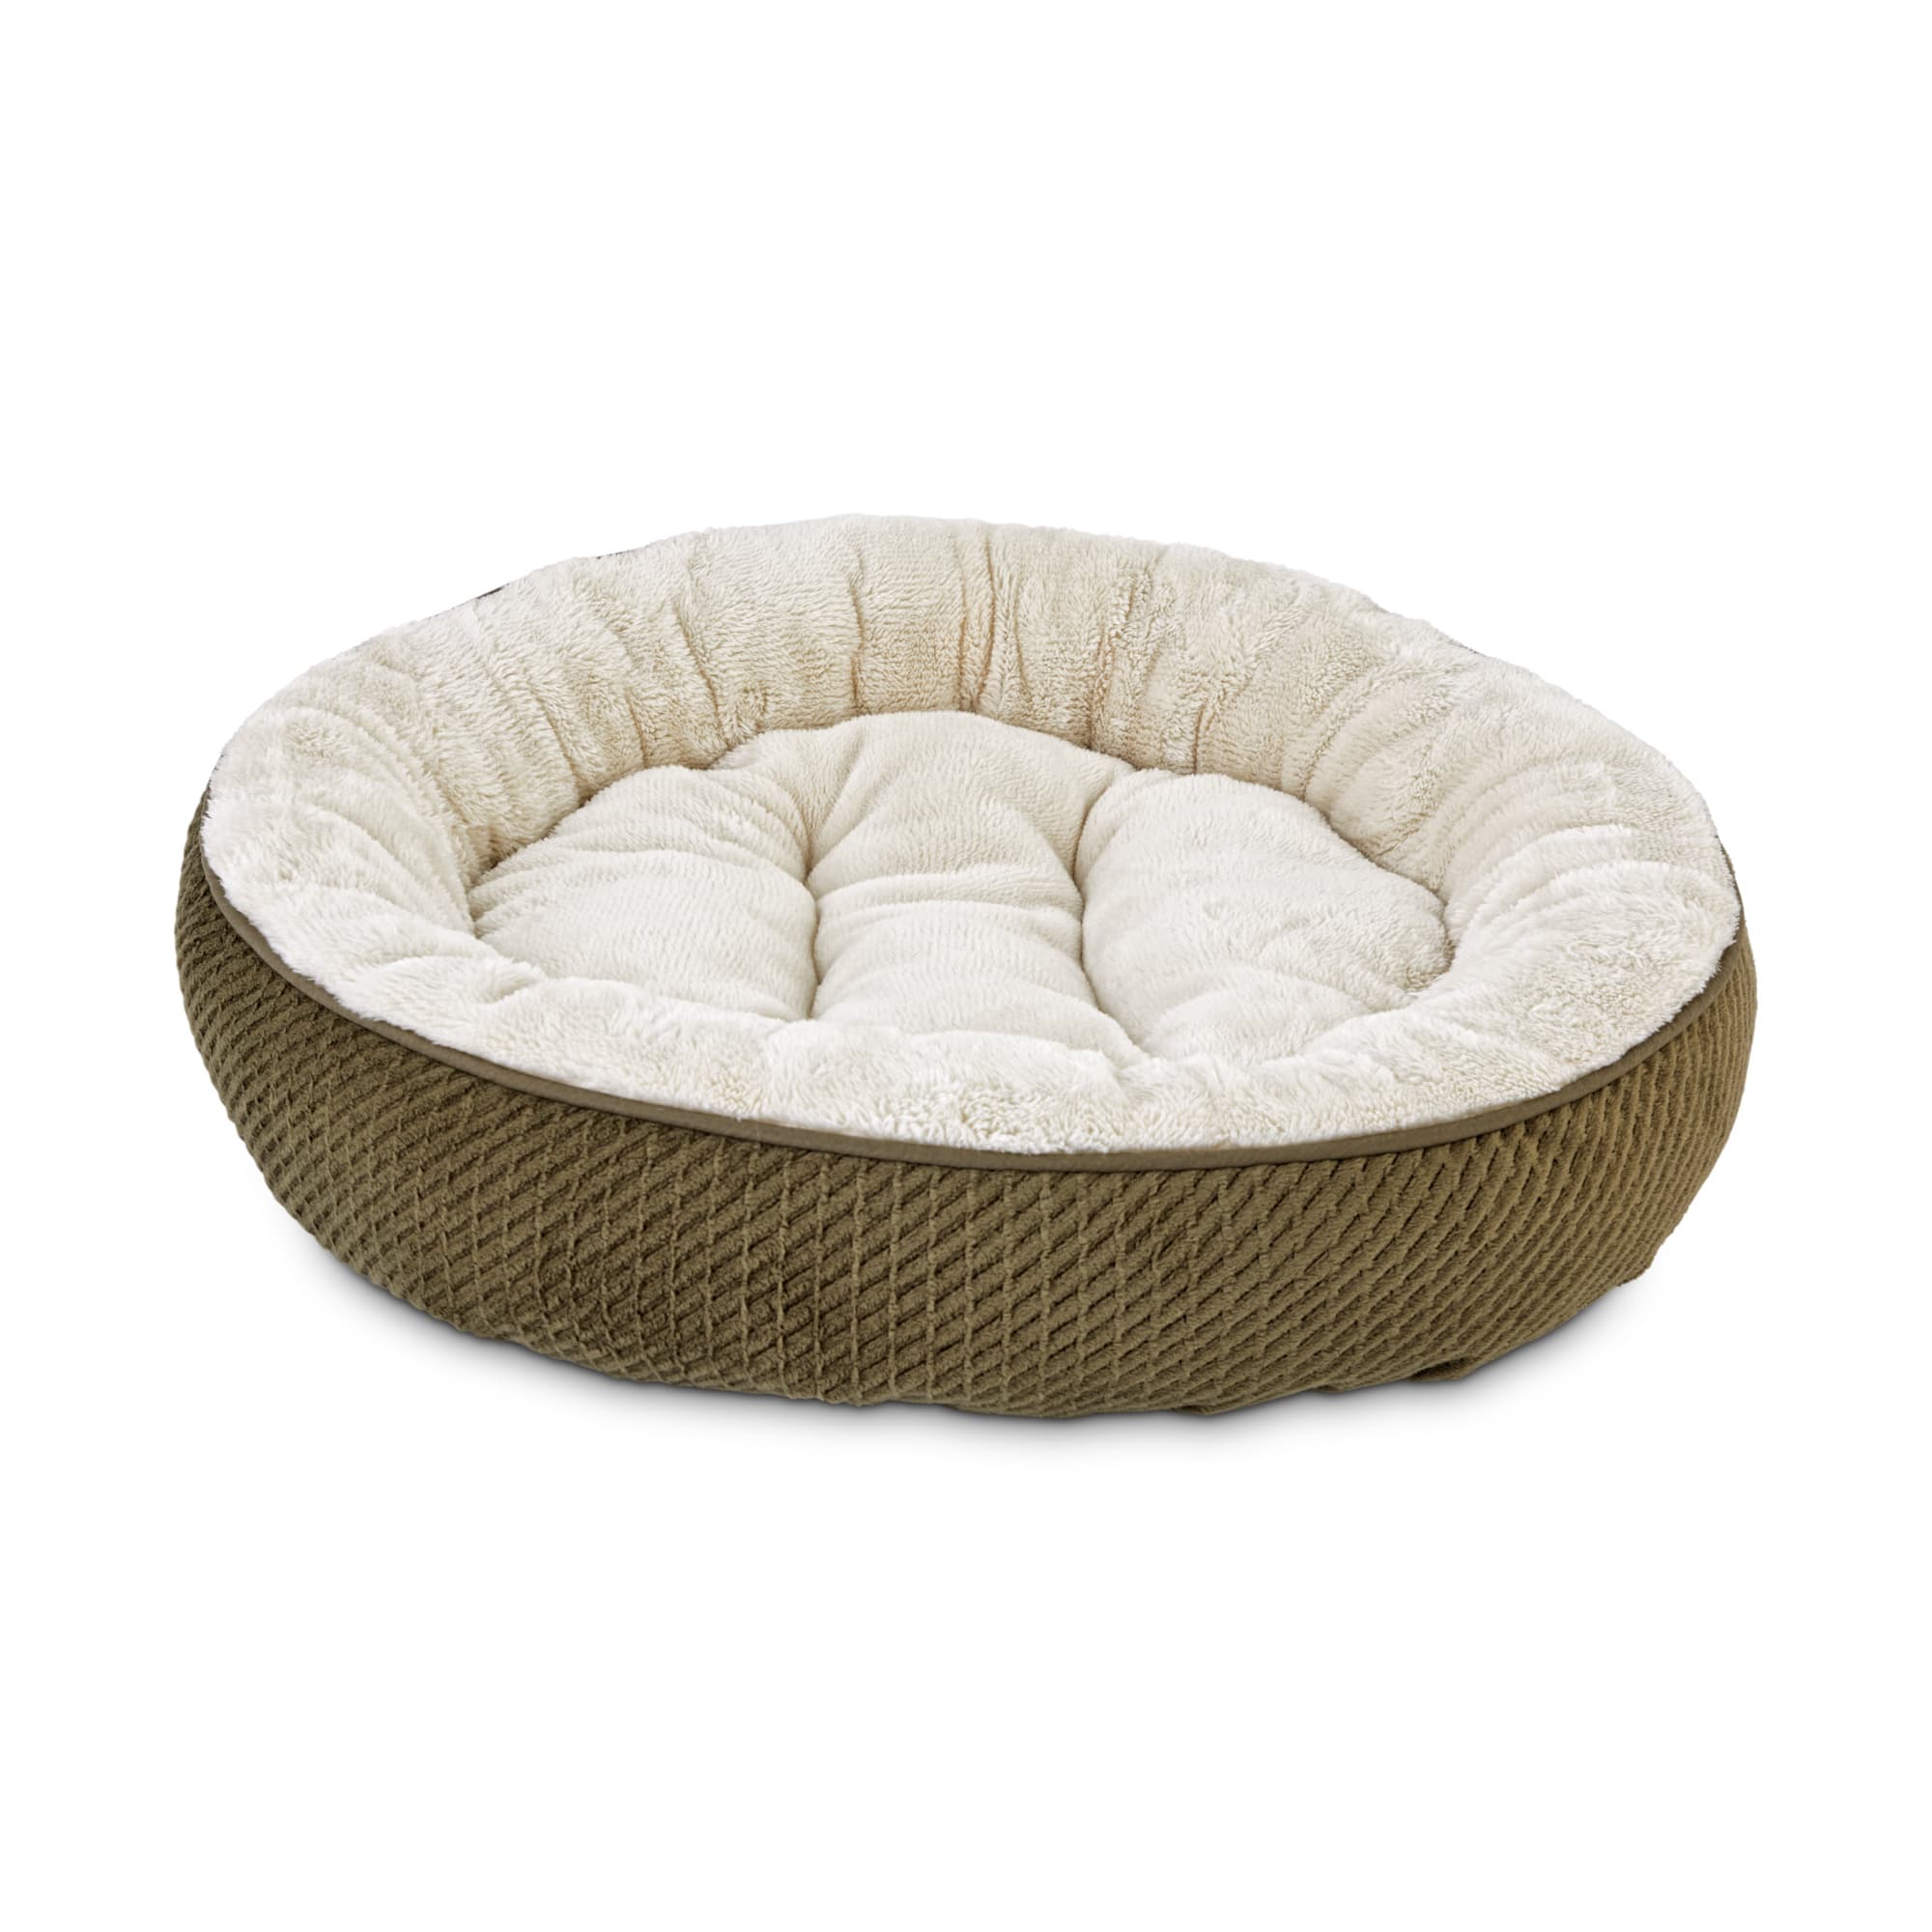 Harmony Textured Round Cat Bed In Olive, Round Cat Bed